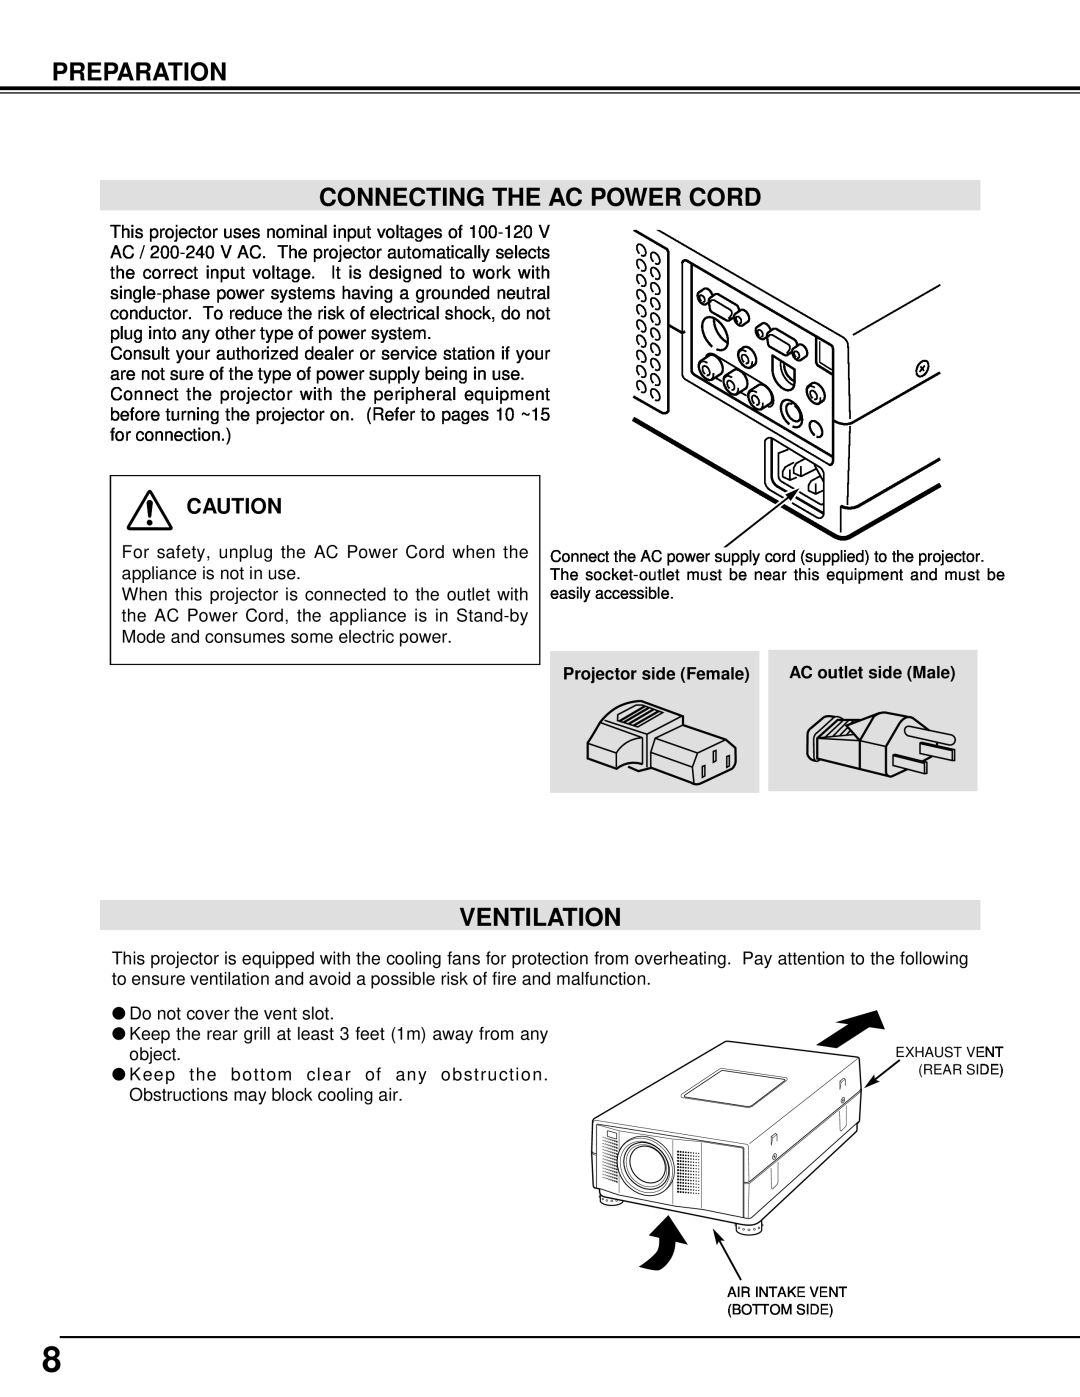 BOXLIGHT CP-14t manual Connecting The Ac Power Cord, Ventilation, Preparation, Projector side Female, AC outlet side Male 